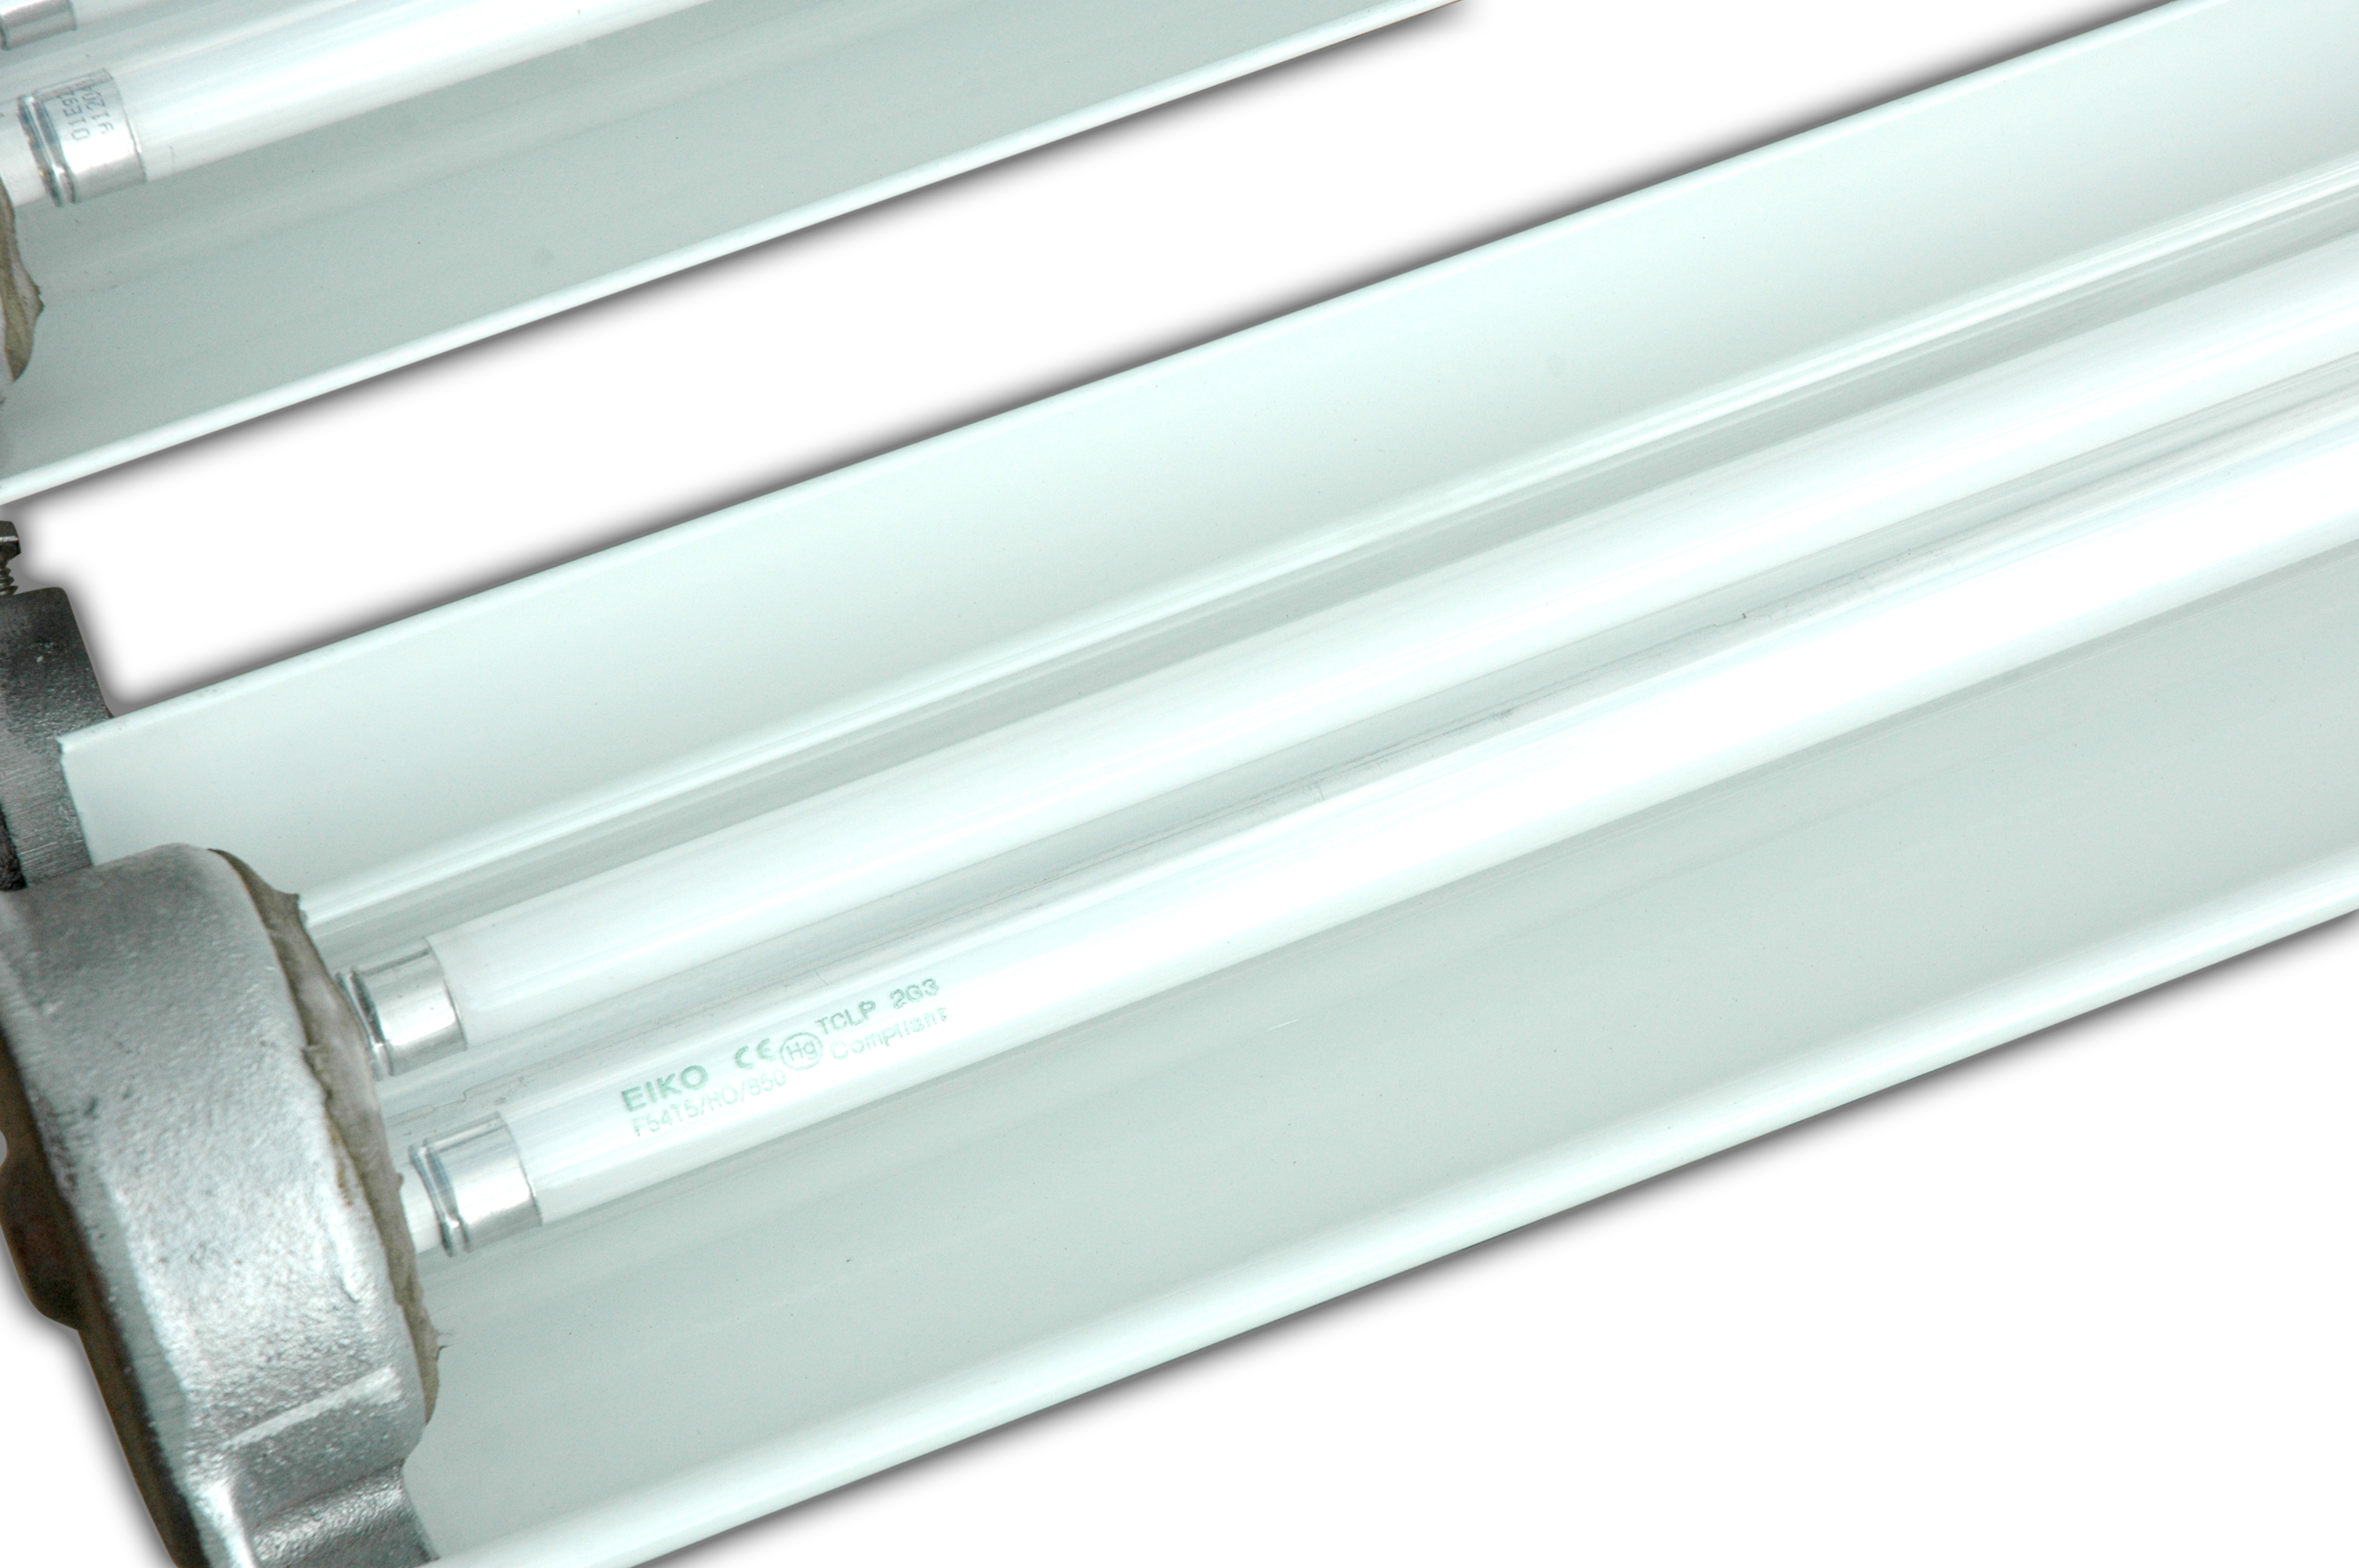 Low Profile Explosion Proof Fluorescent Linear Light Fixture from Larson Electronics